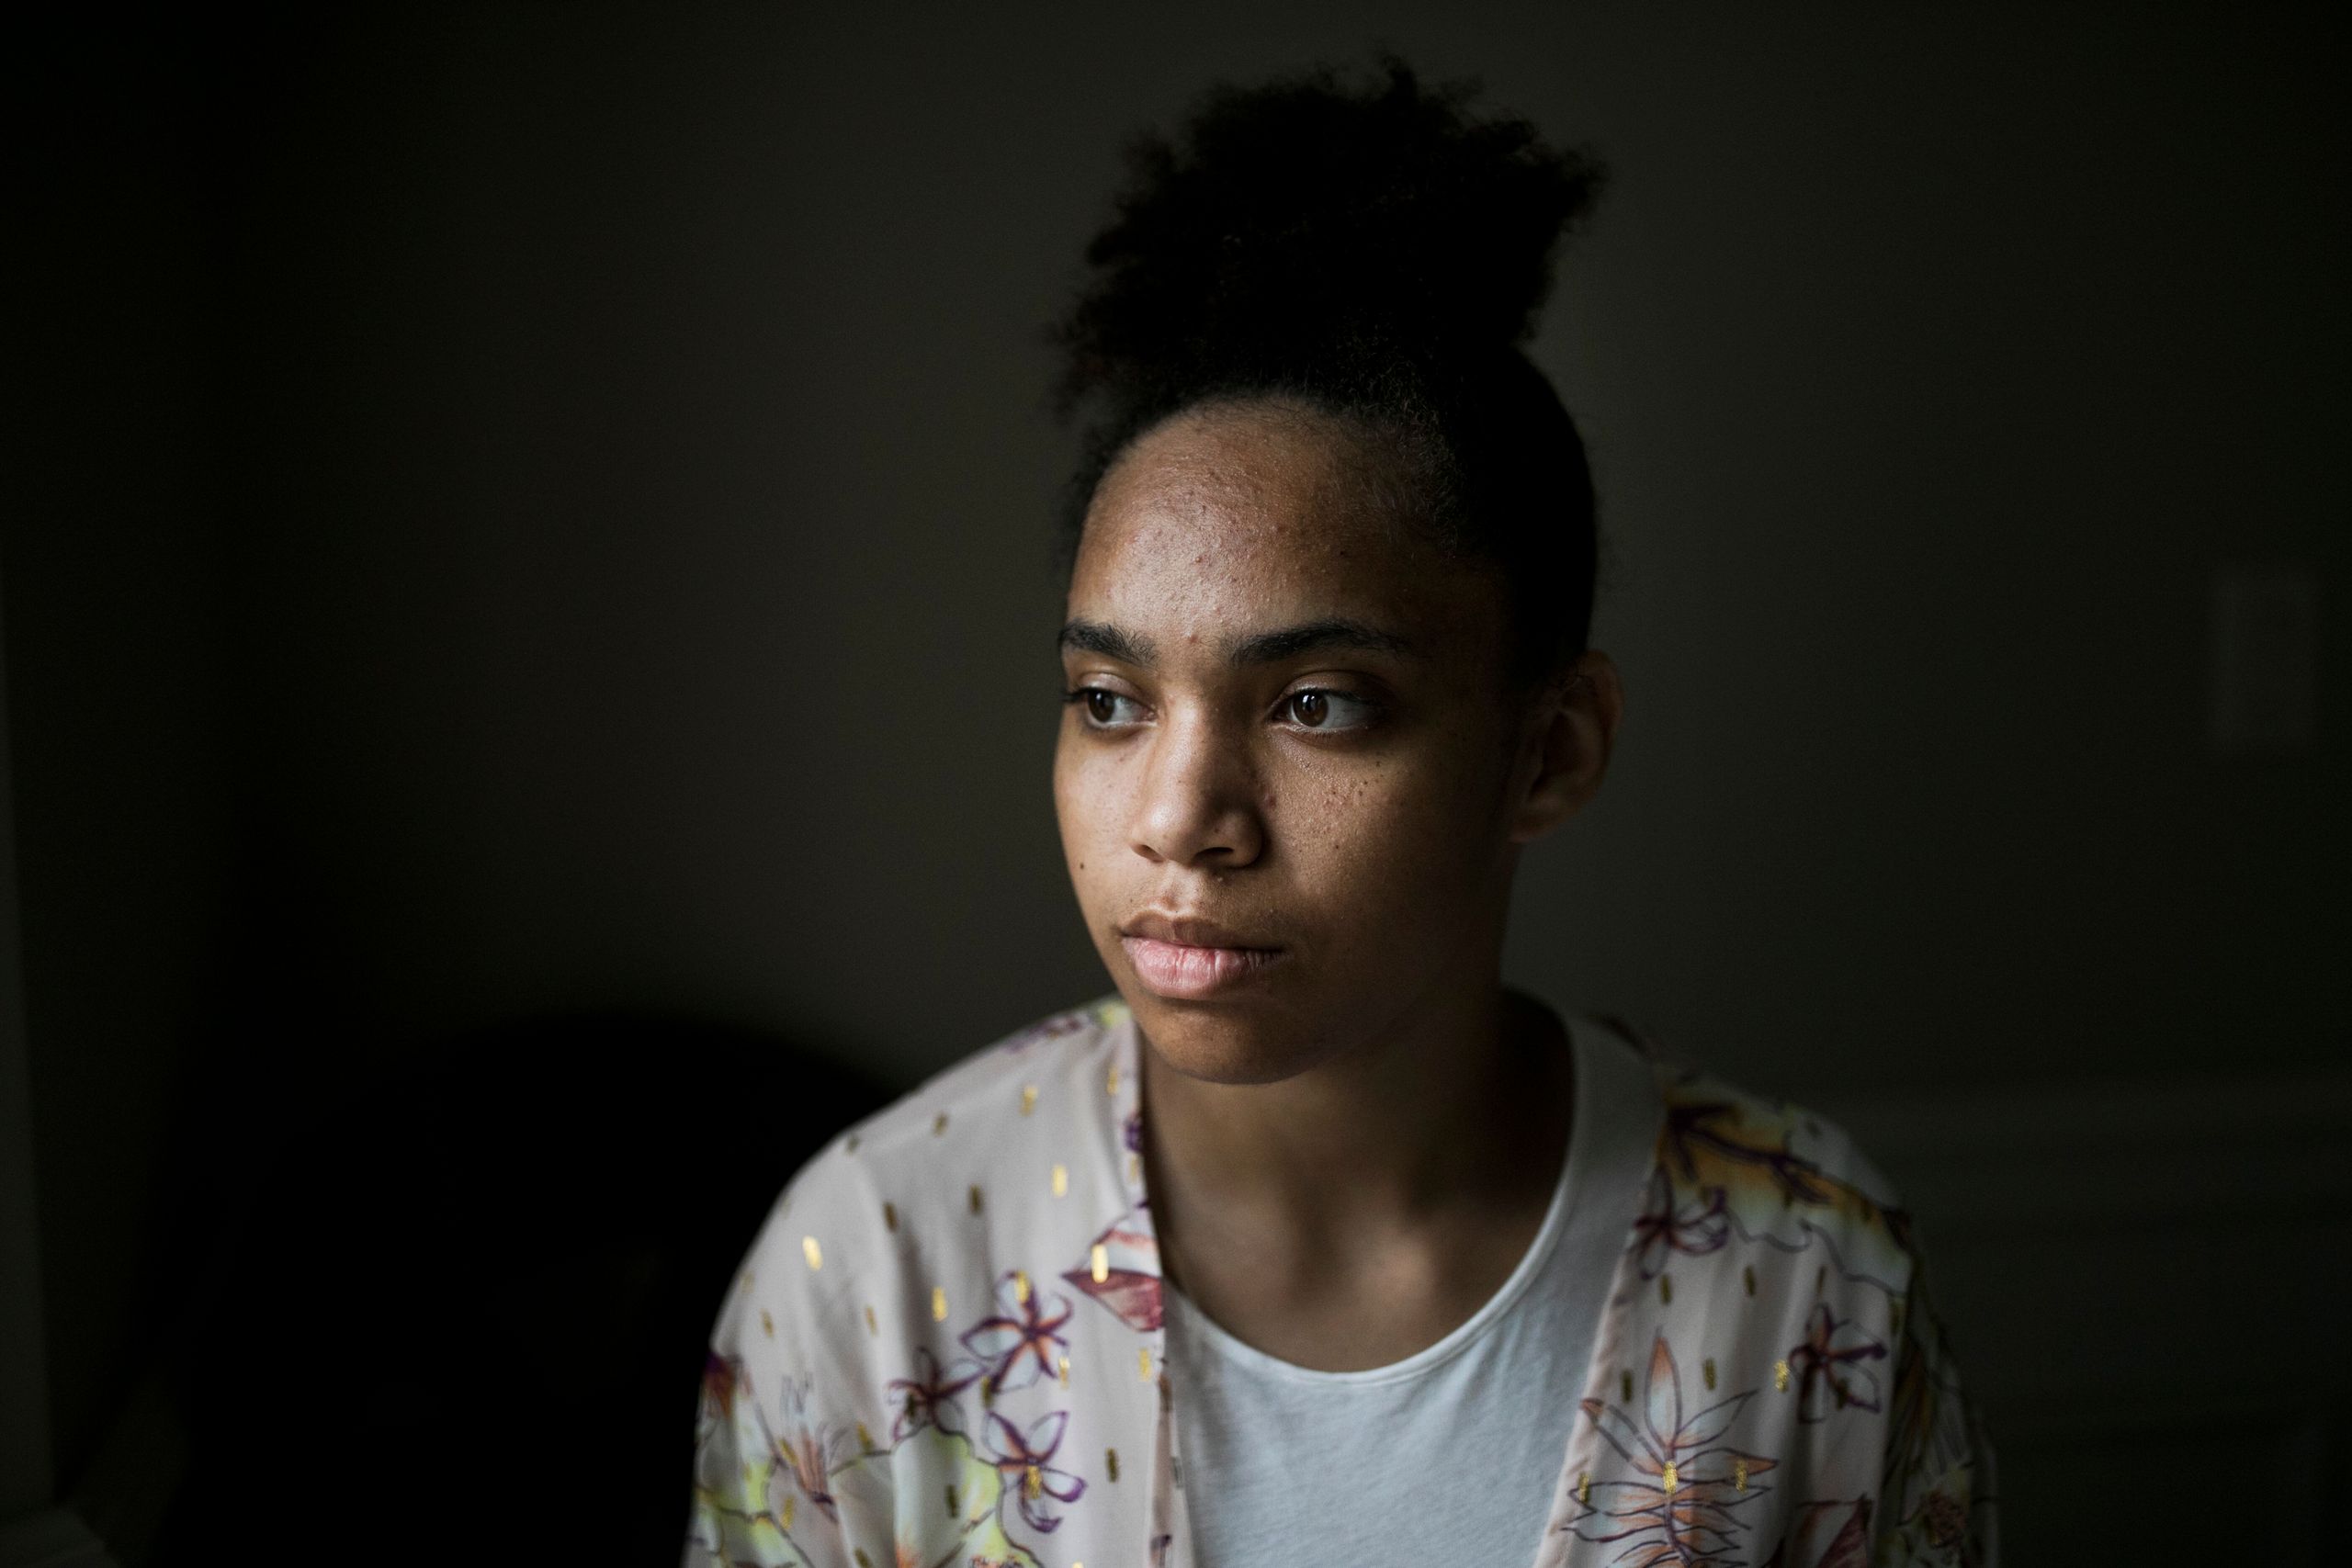 Bresha Meadows poses for a portrait in her lawyer's home in Chagrin Falls, Ohio, on Oct. 2, 2019. Meadows killed her father a